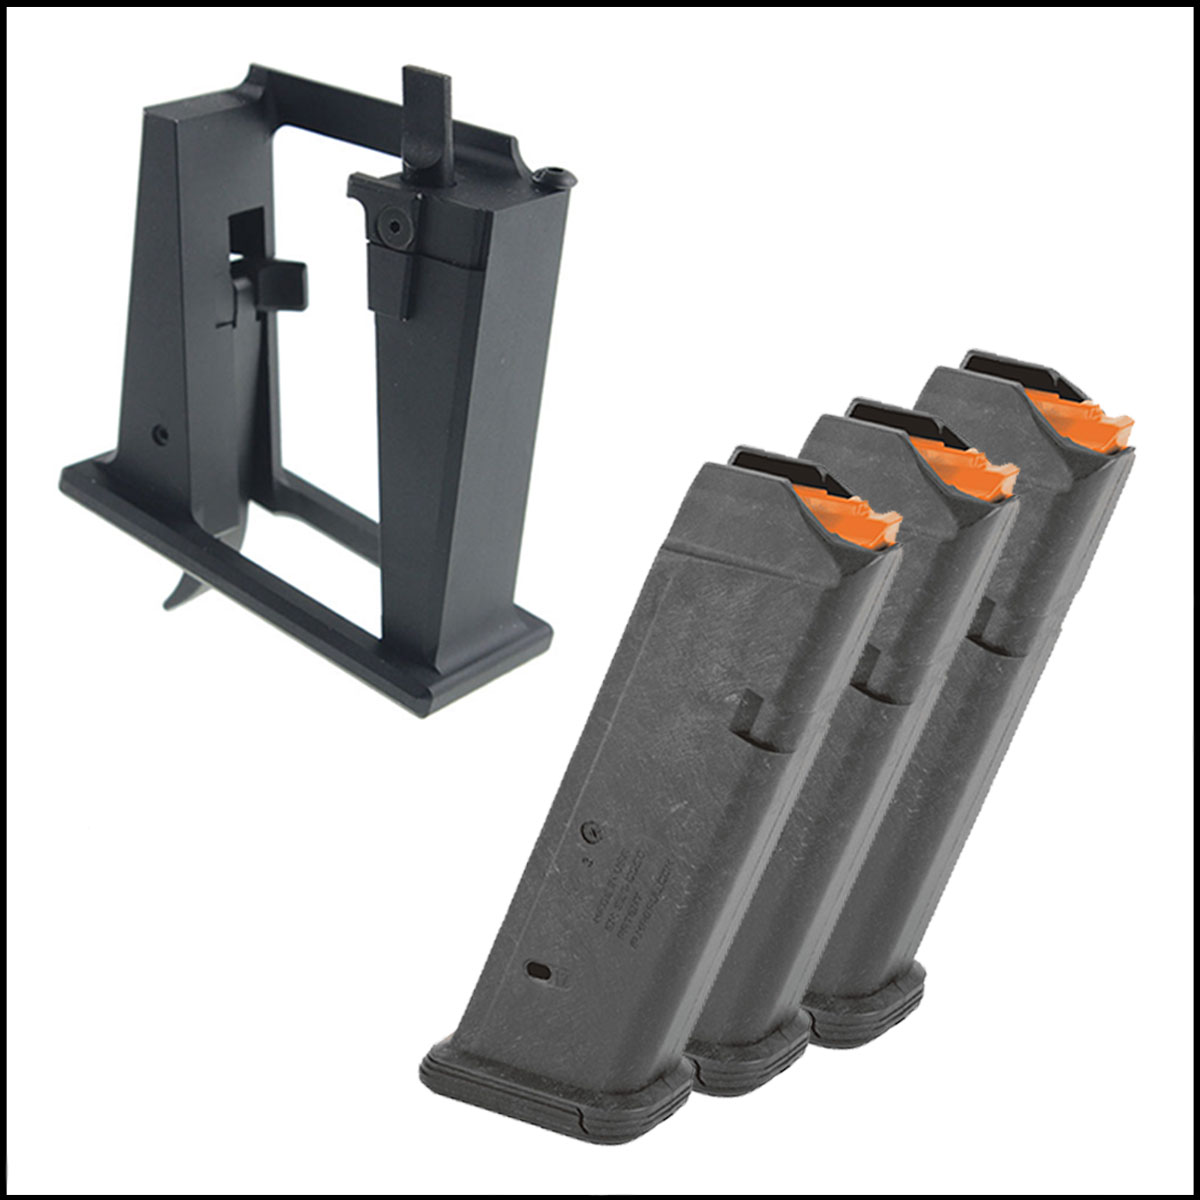 Conversion kit + Magazine combo: Sylvan Arms AR-15 9mm Magwell Adapter for Glock Magazines  + Magpul PMAG 10 GL9, 9x19, 3-Pack, G17 Compatible